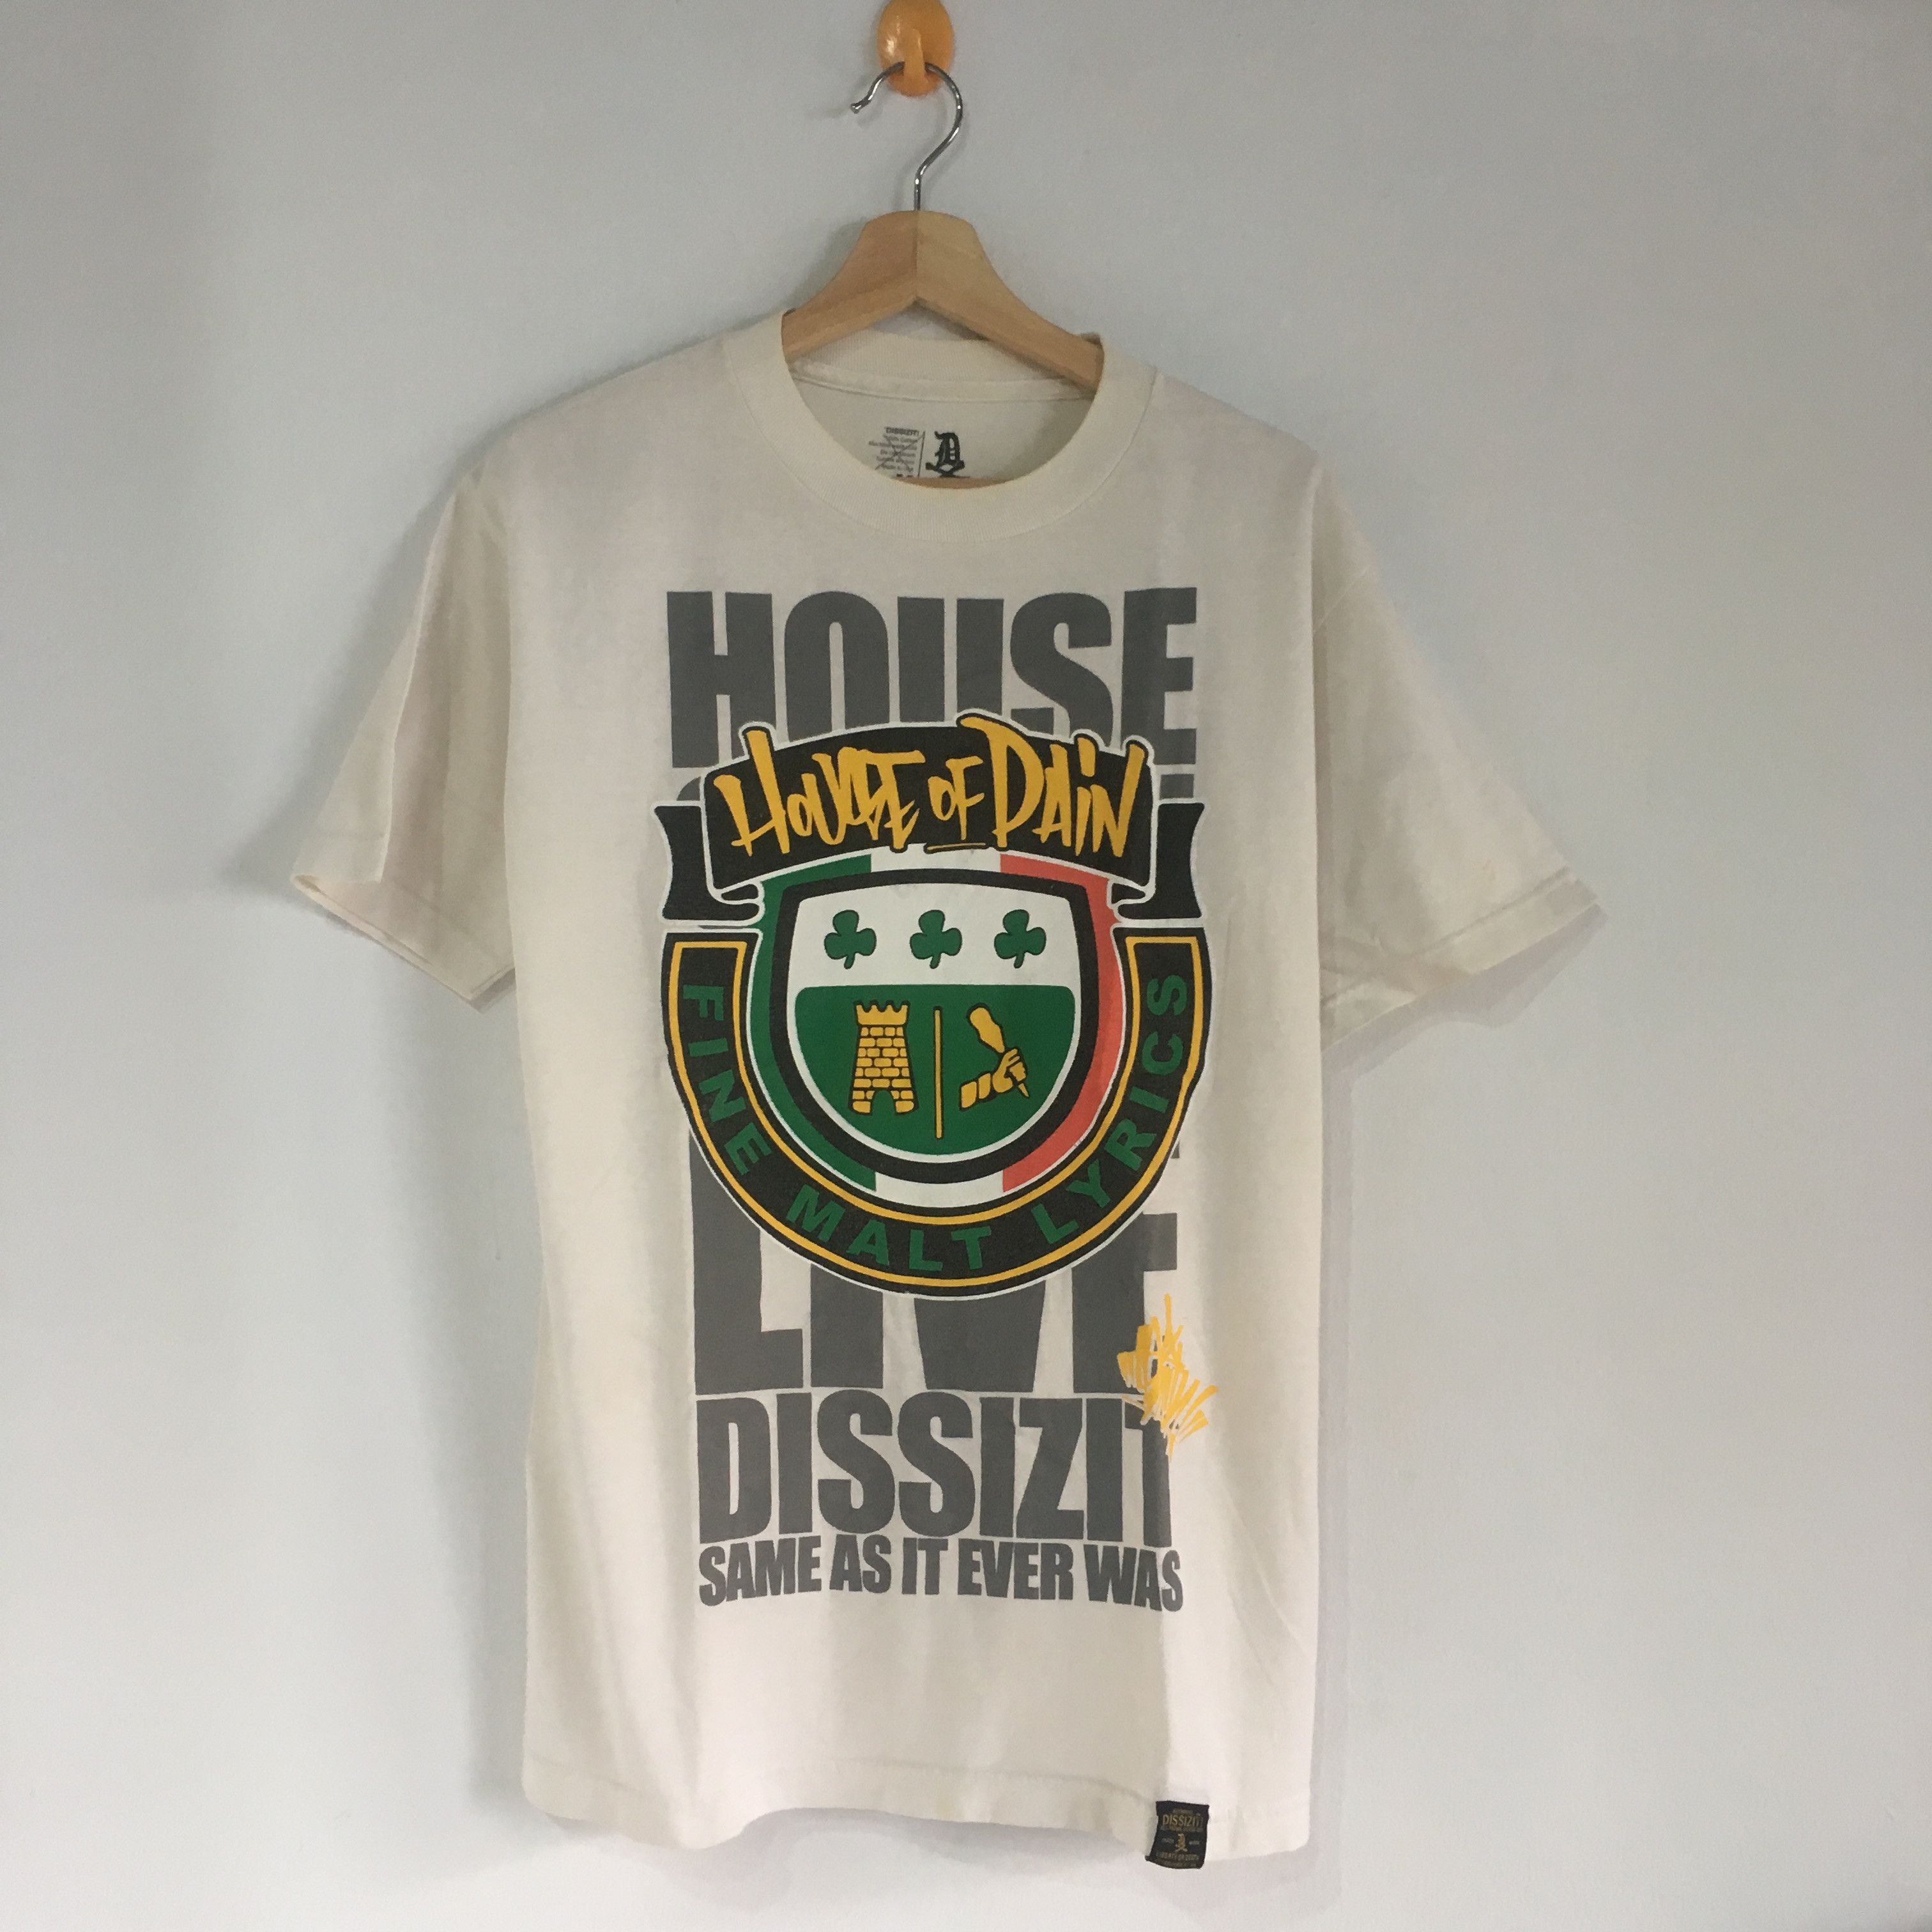 90s house of pain rap hiphop Tシャツ　ラップ